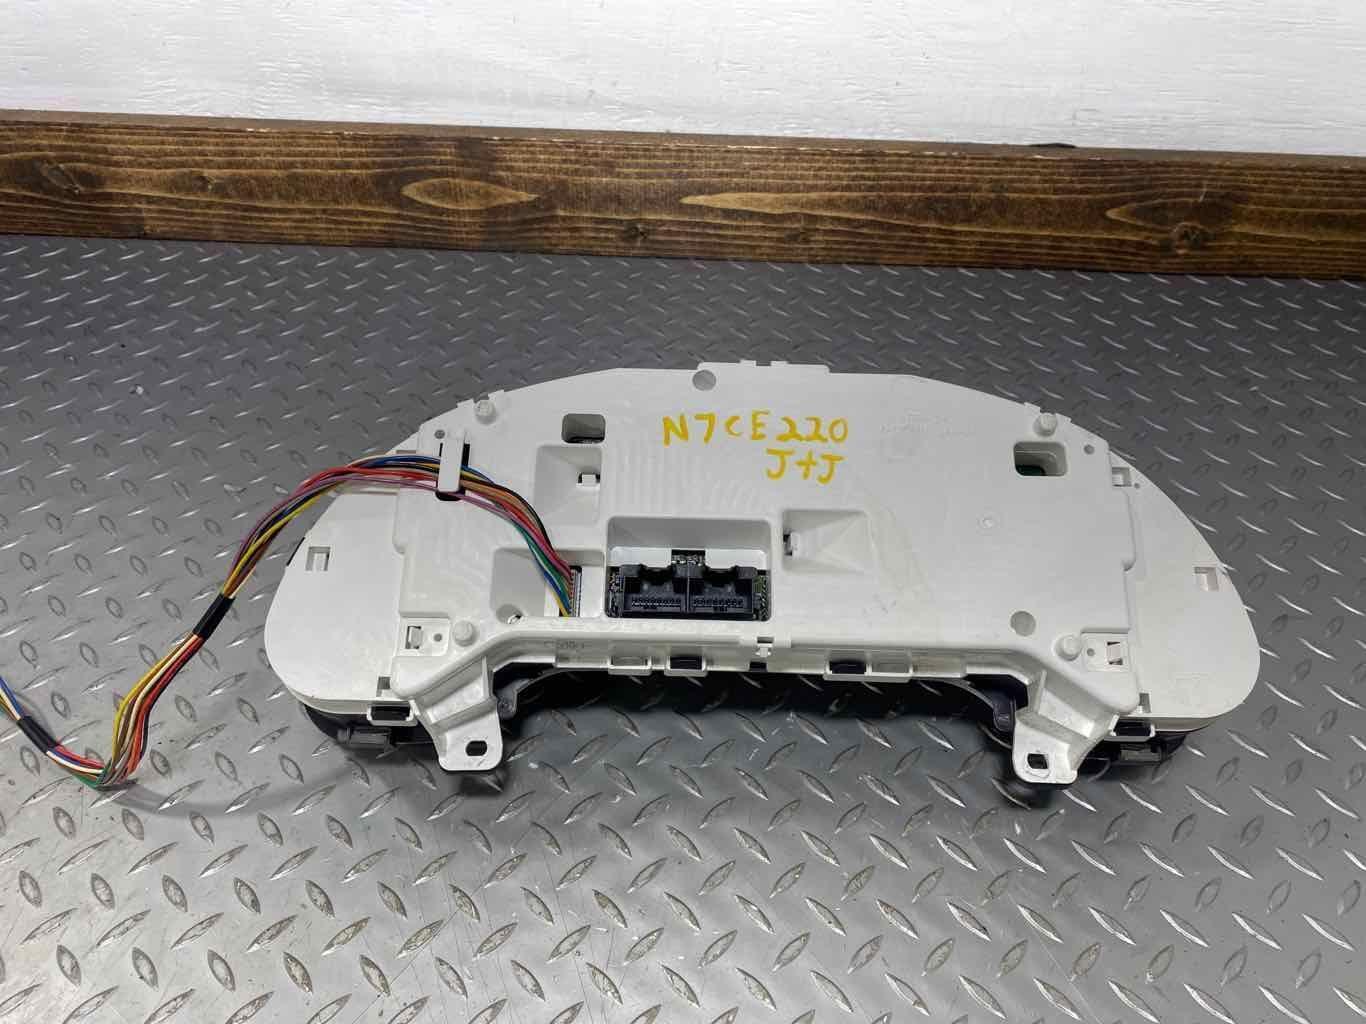 06-08 Chevy Corvette C6 Convertible 200MPH Speedometer Cluster (15832637) Tested